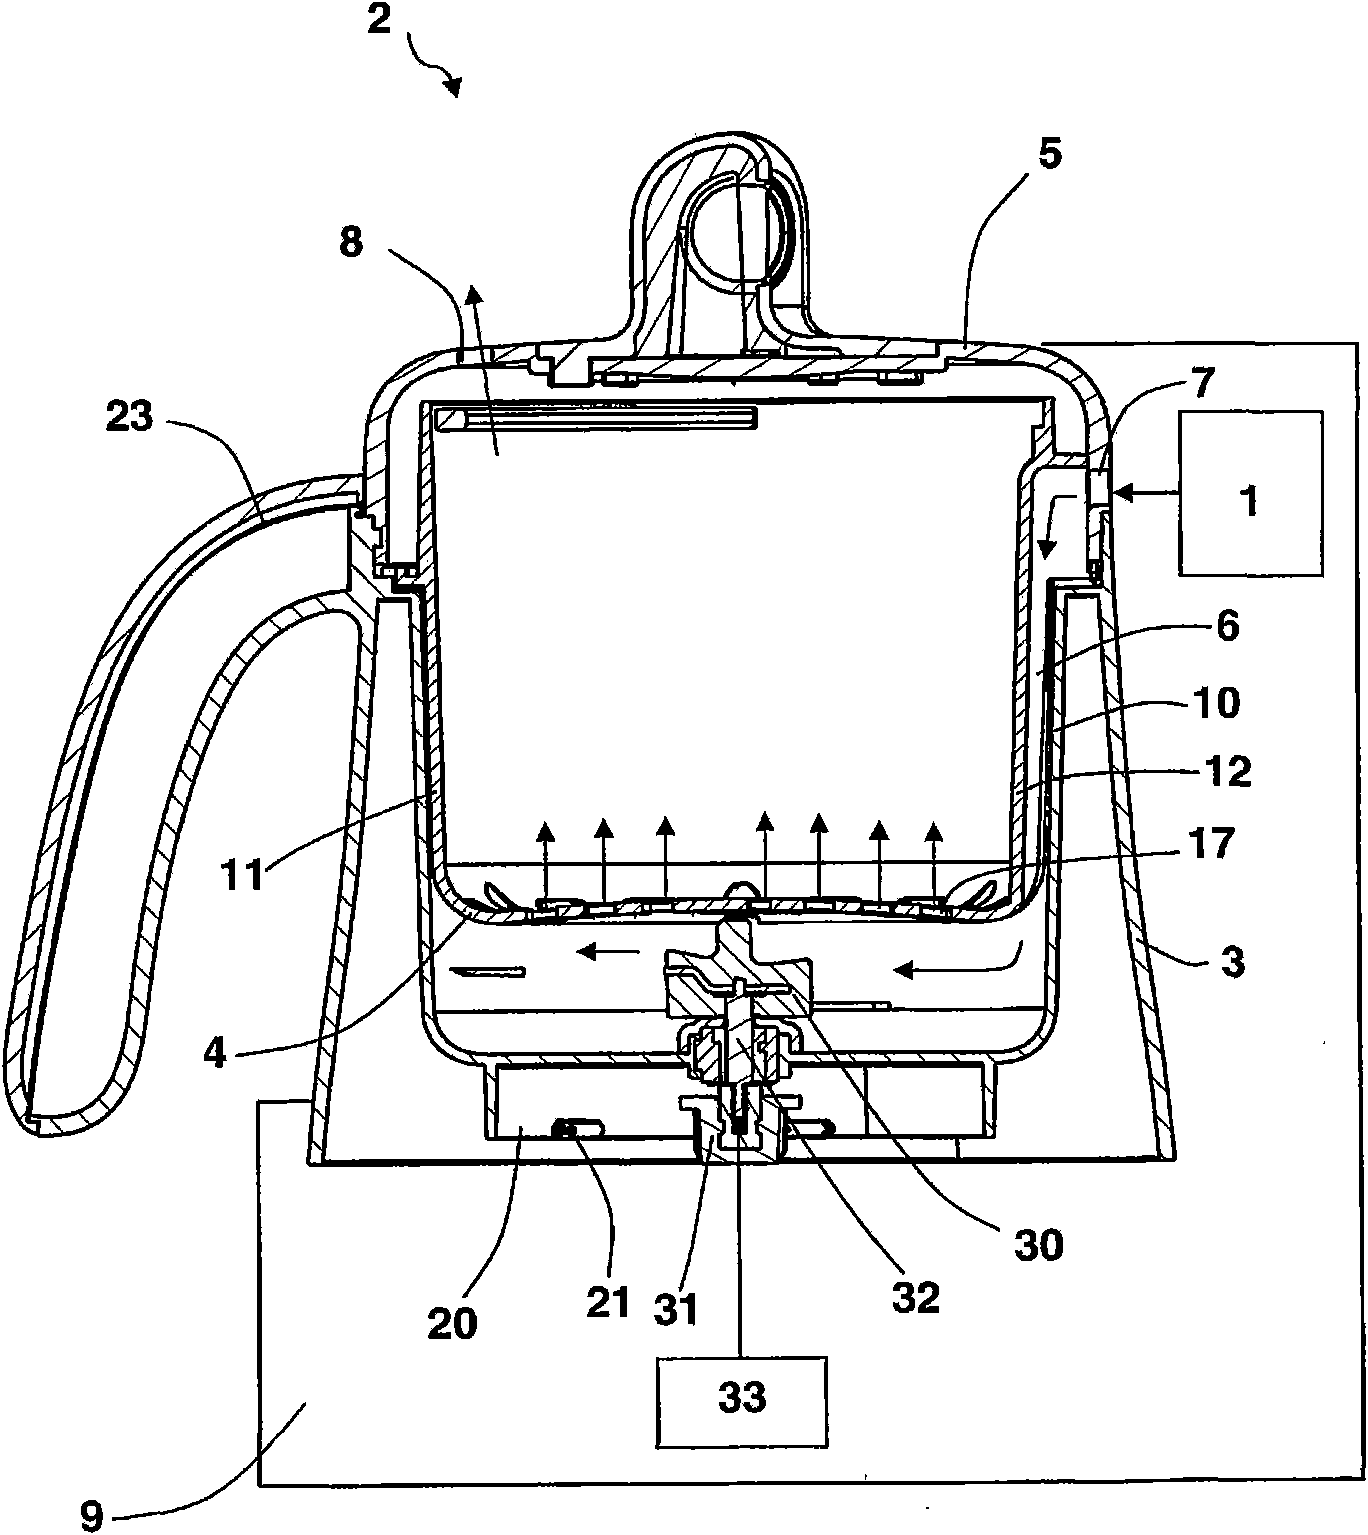 Apparatus for the steam preparation of foodstuffs